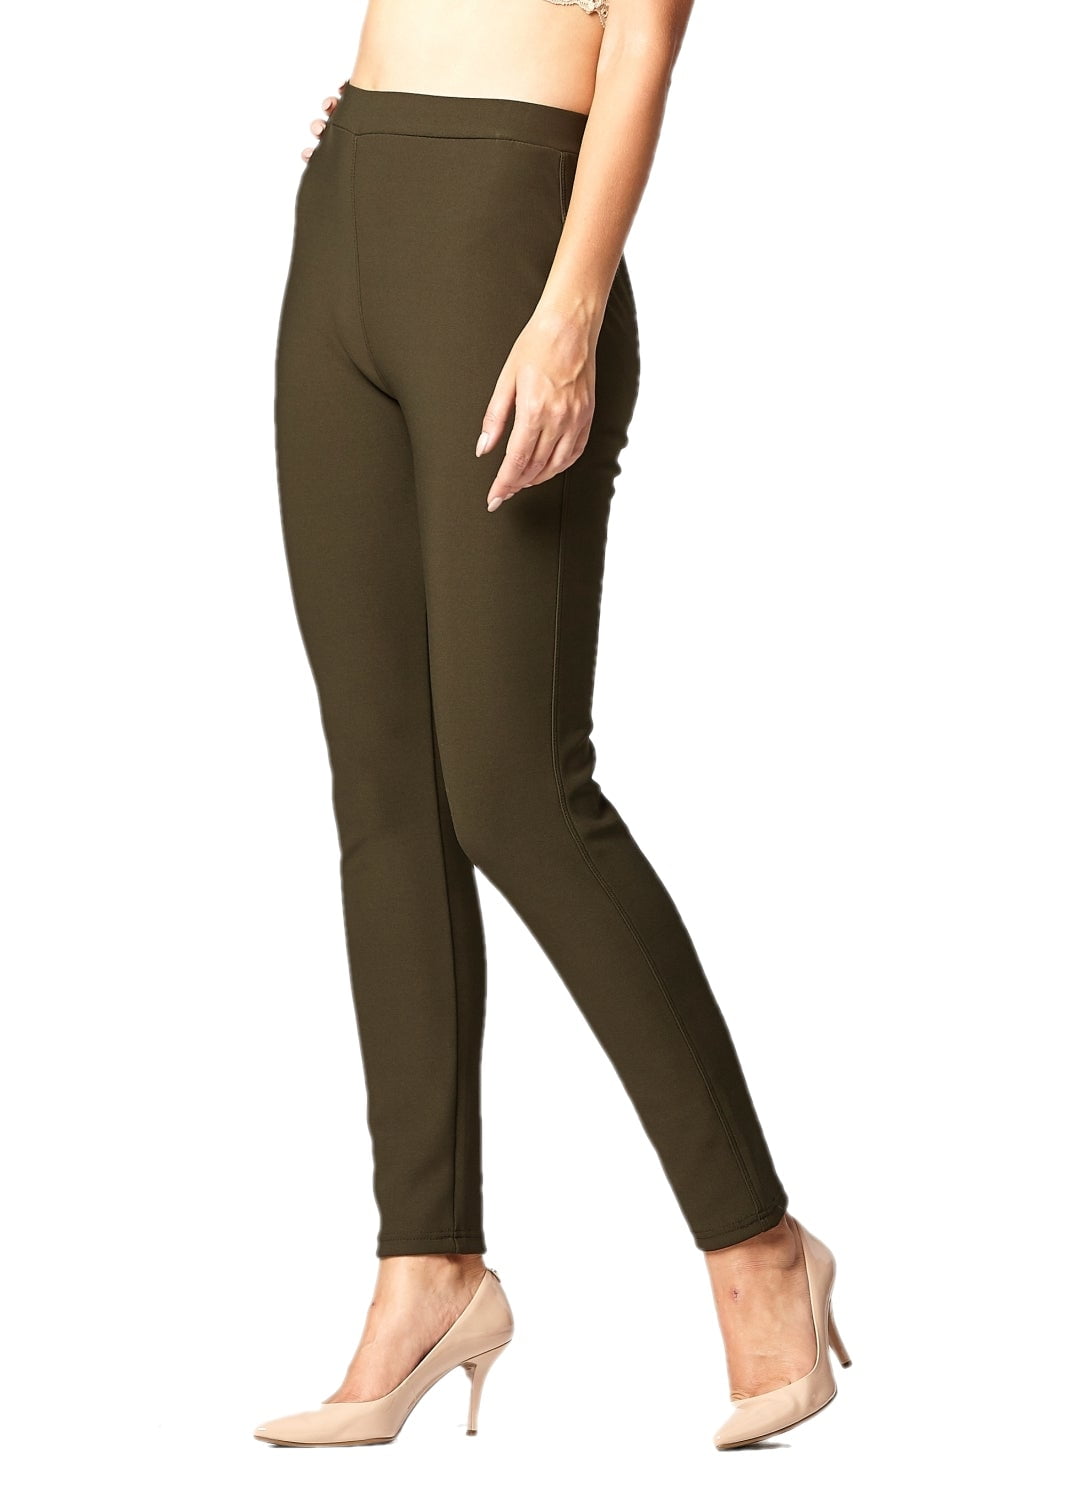 Conceited Women's Classic High Waist Stretch Ponte Pants - Dressy Leggings  with Butt Lift 